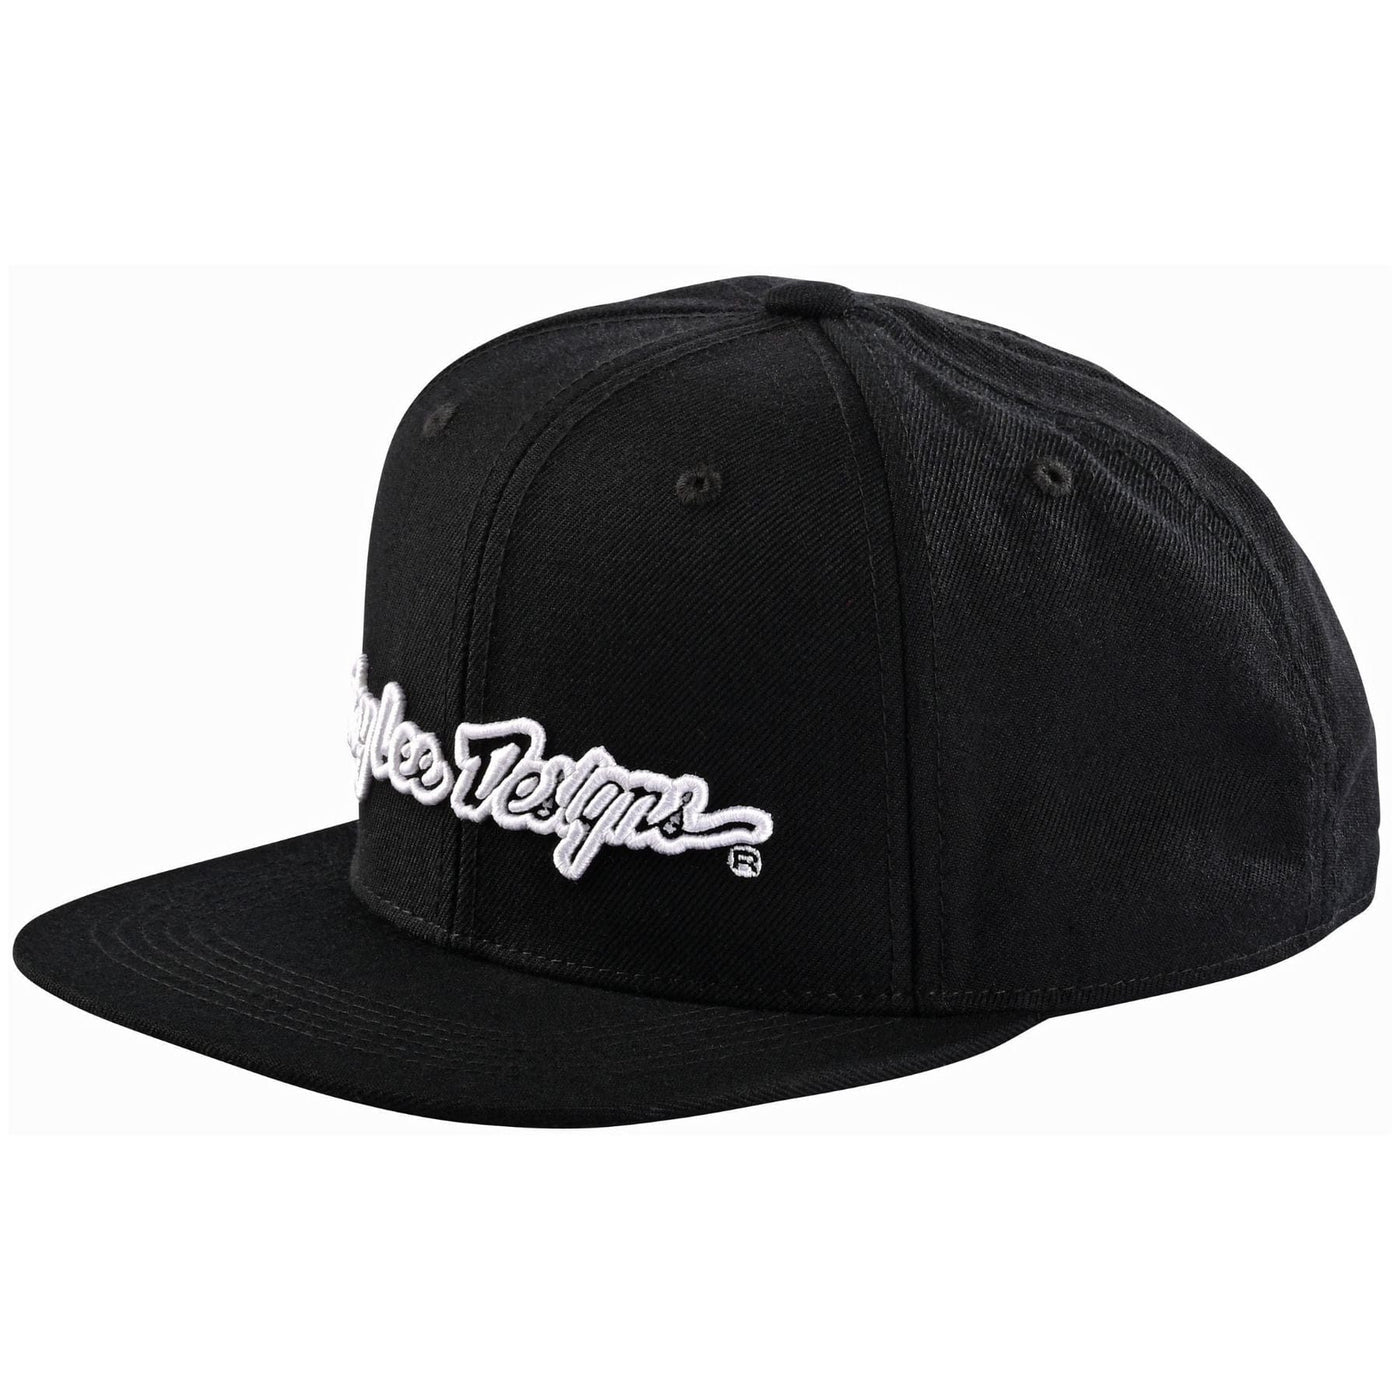 Troy Lee Designs 9FIFTY Signature Snapback Hat - Black/White 8Lines Shop - Fast Shipping